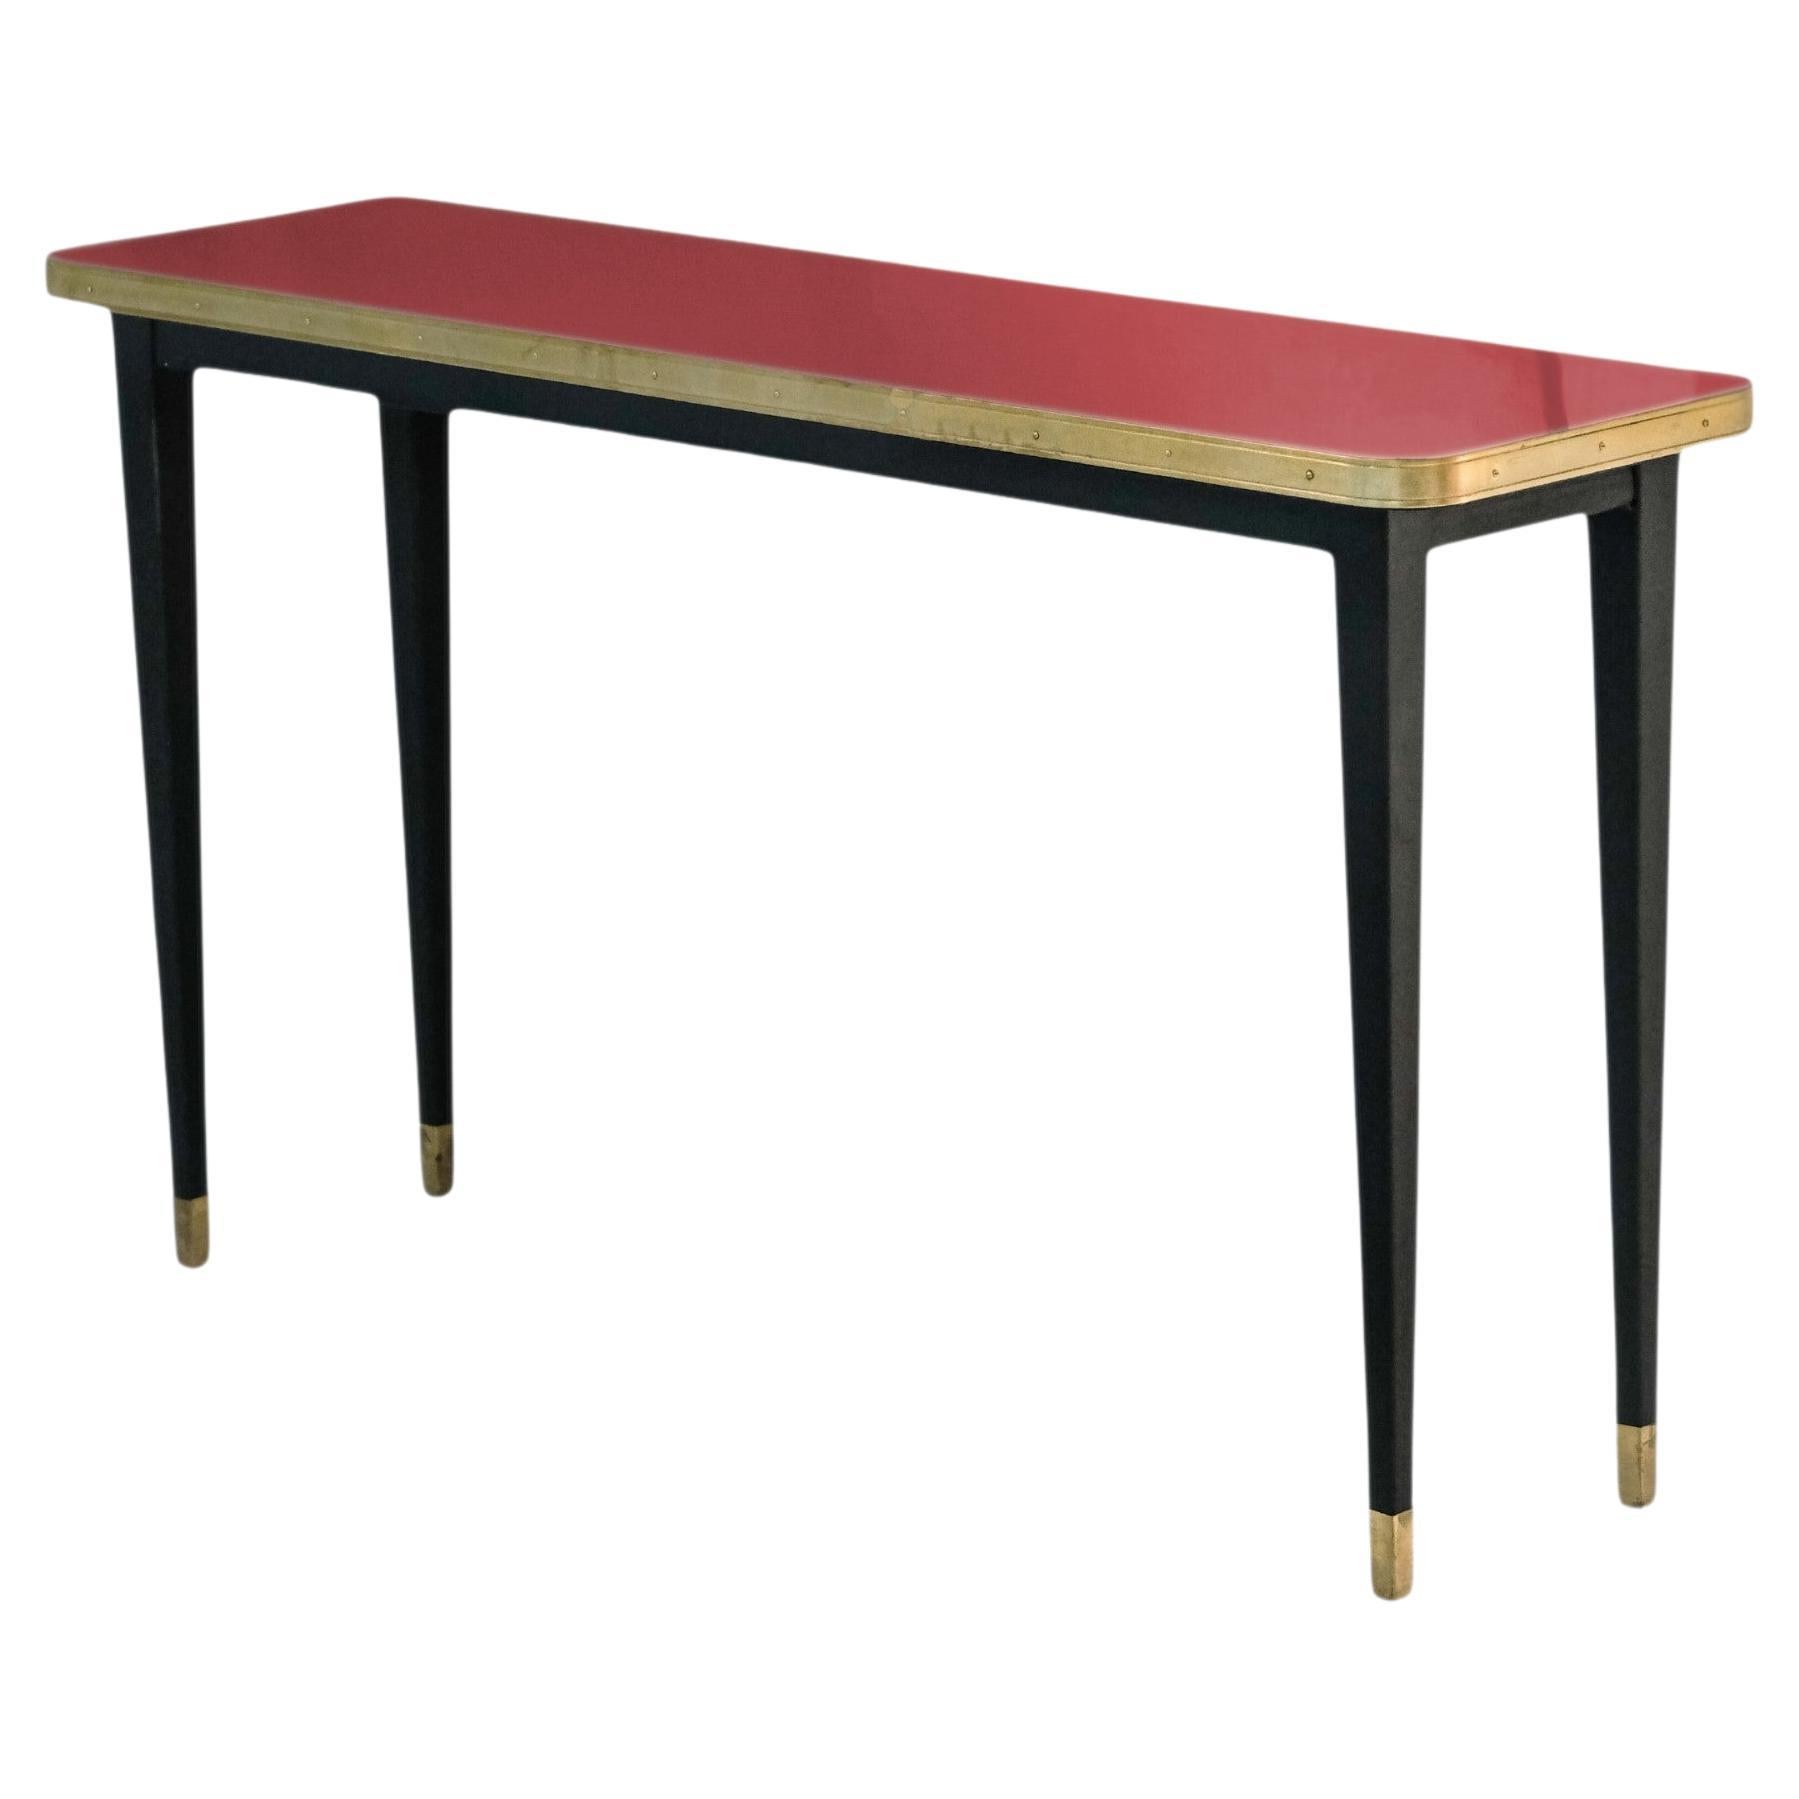 Console Table, High Gloss Laminate & Brass Details, Burgundy - L